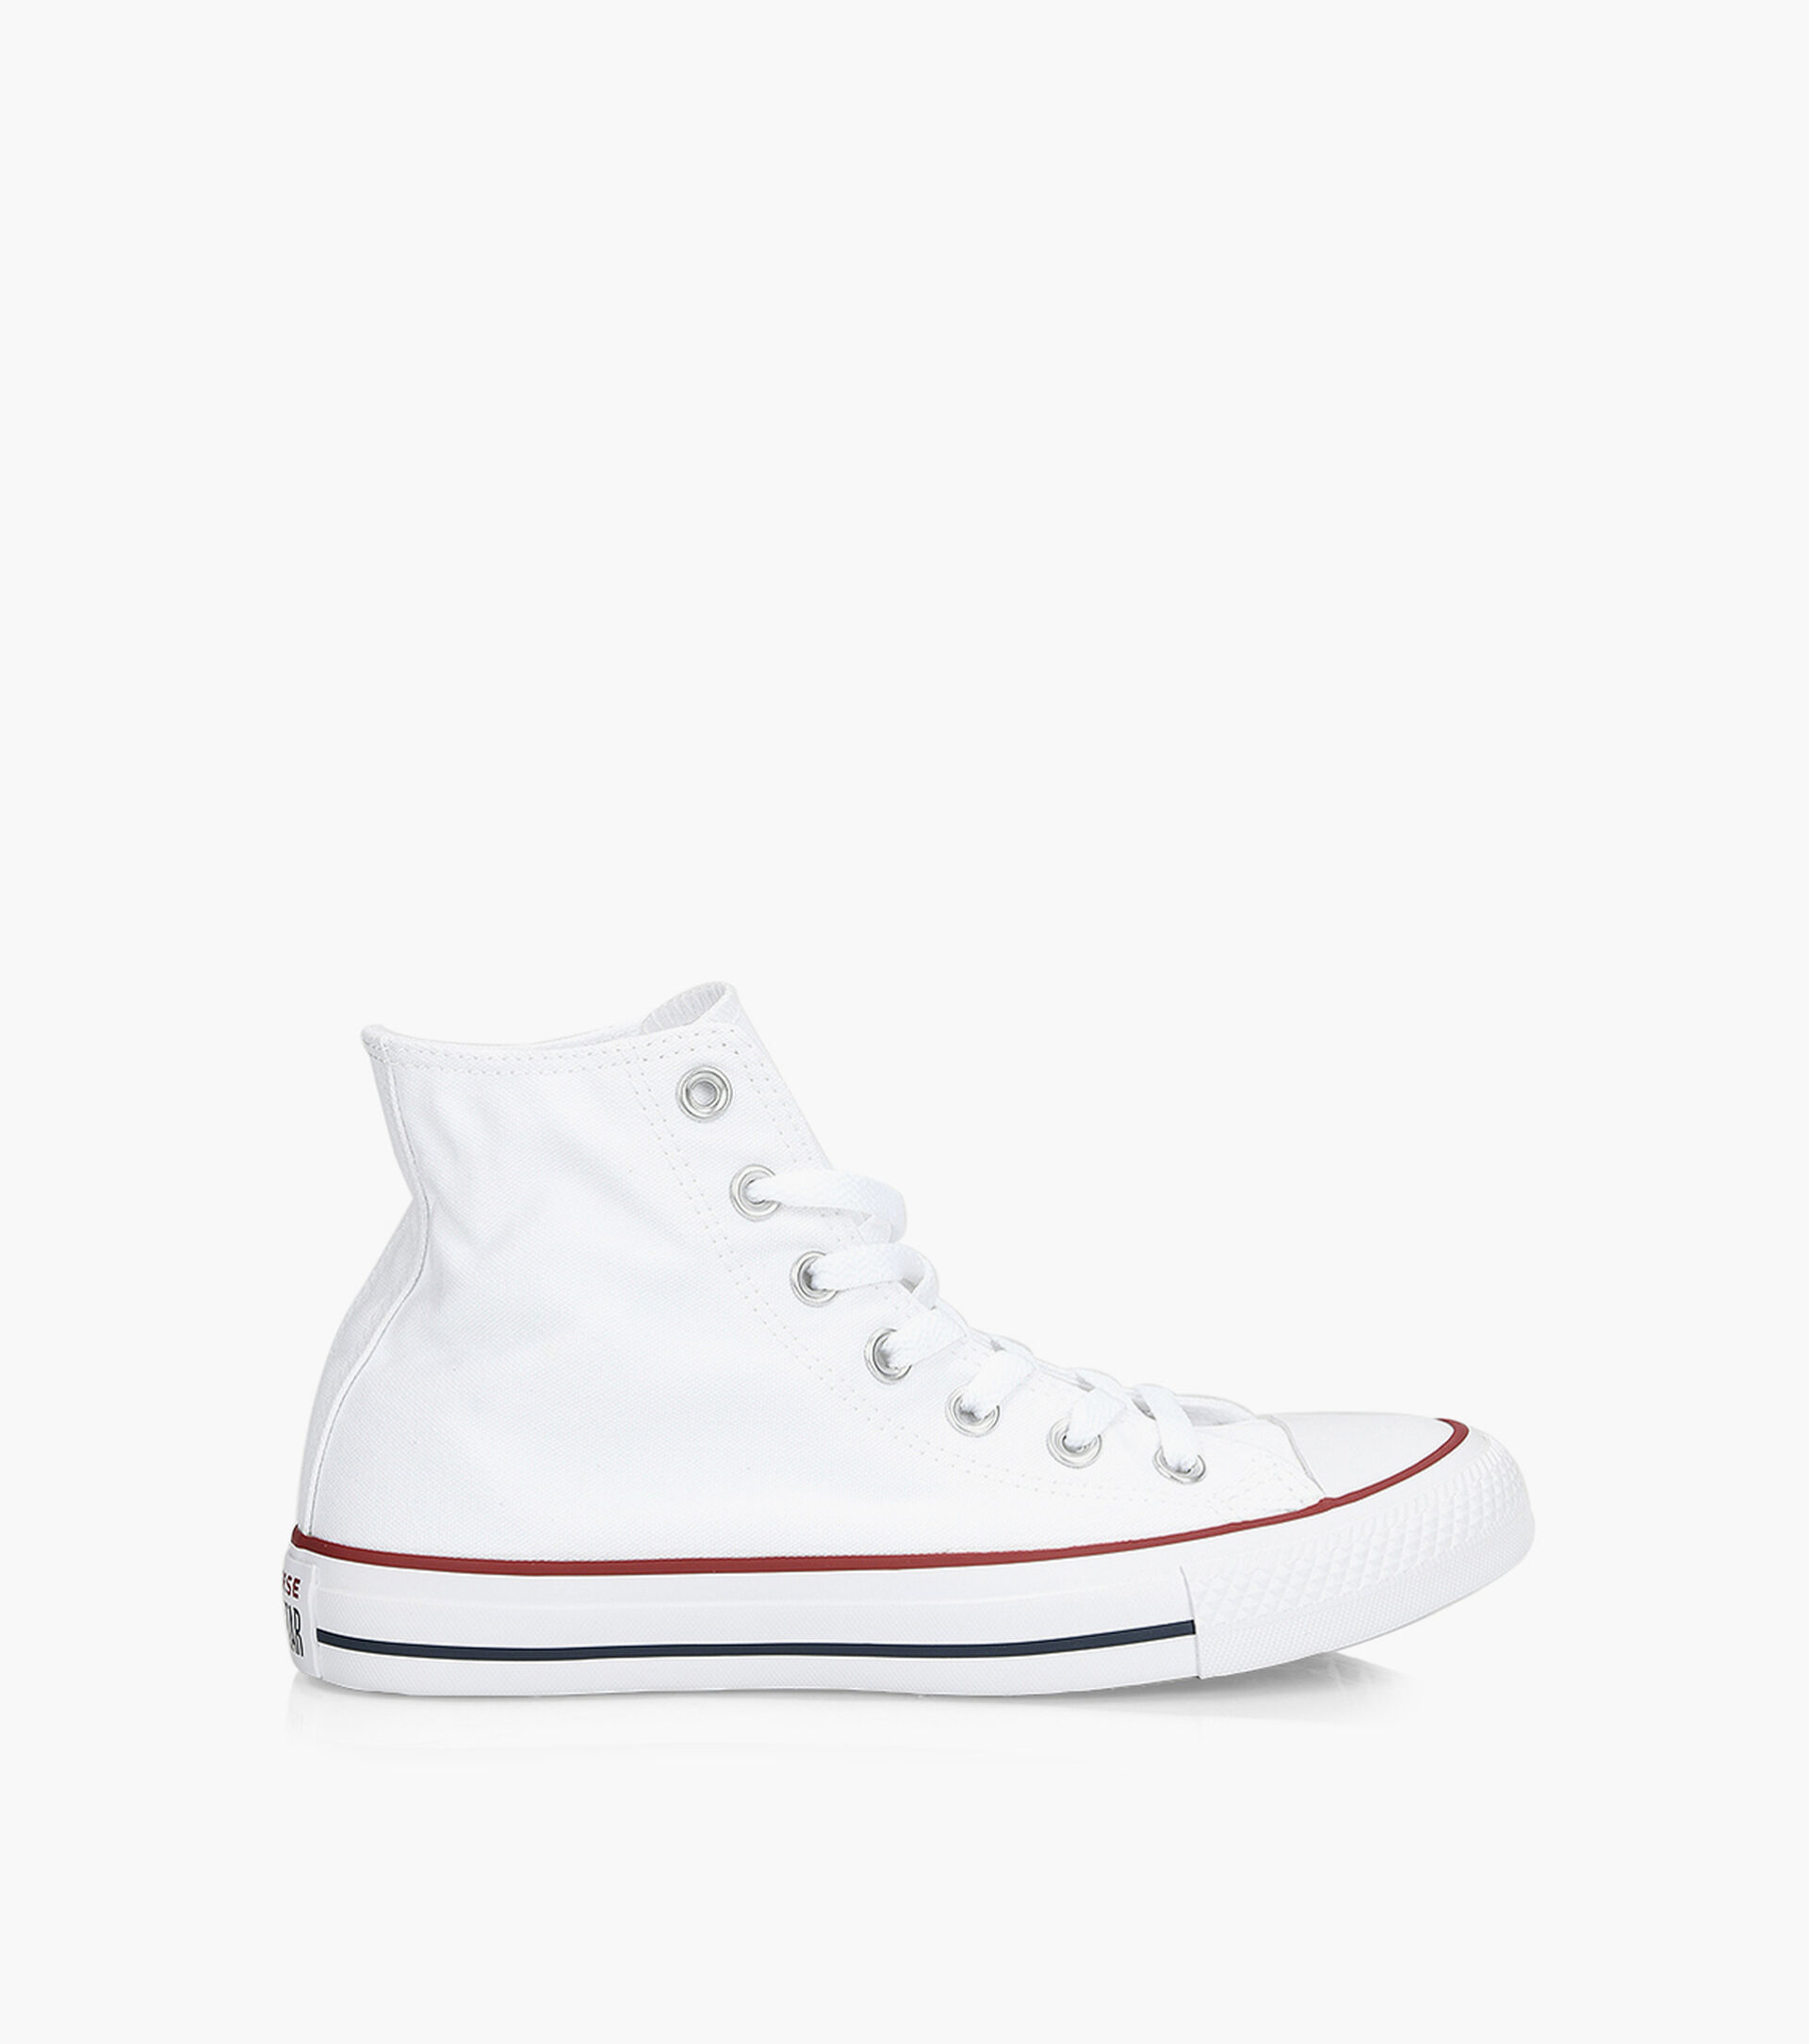 CONVERSE CHUCK TAYLOR ALL STAR HIGH TOP - Fabric | Browns Shoes